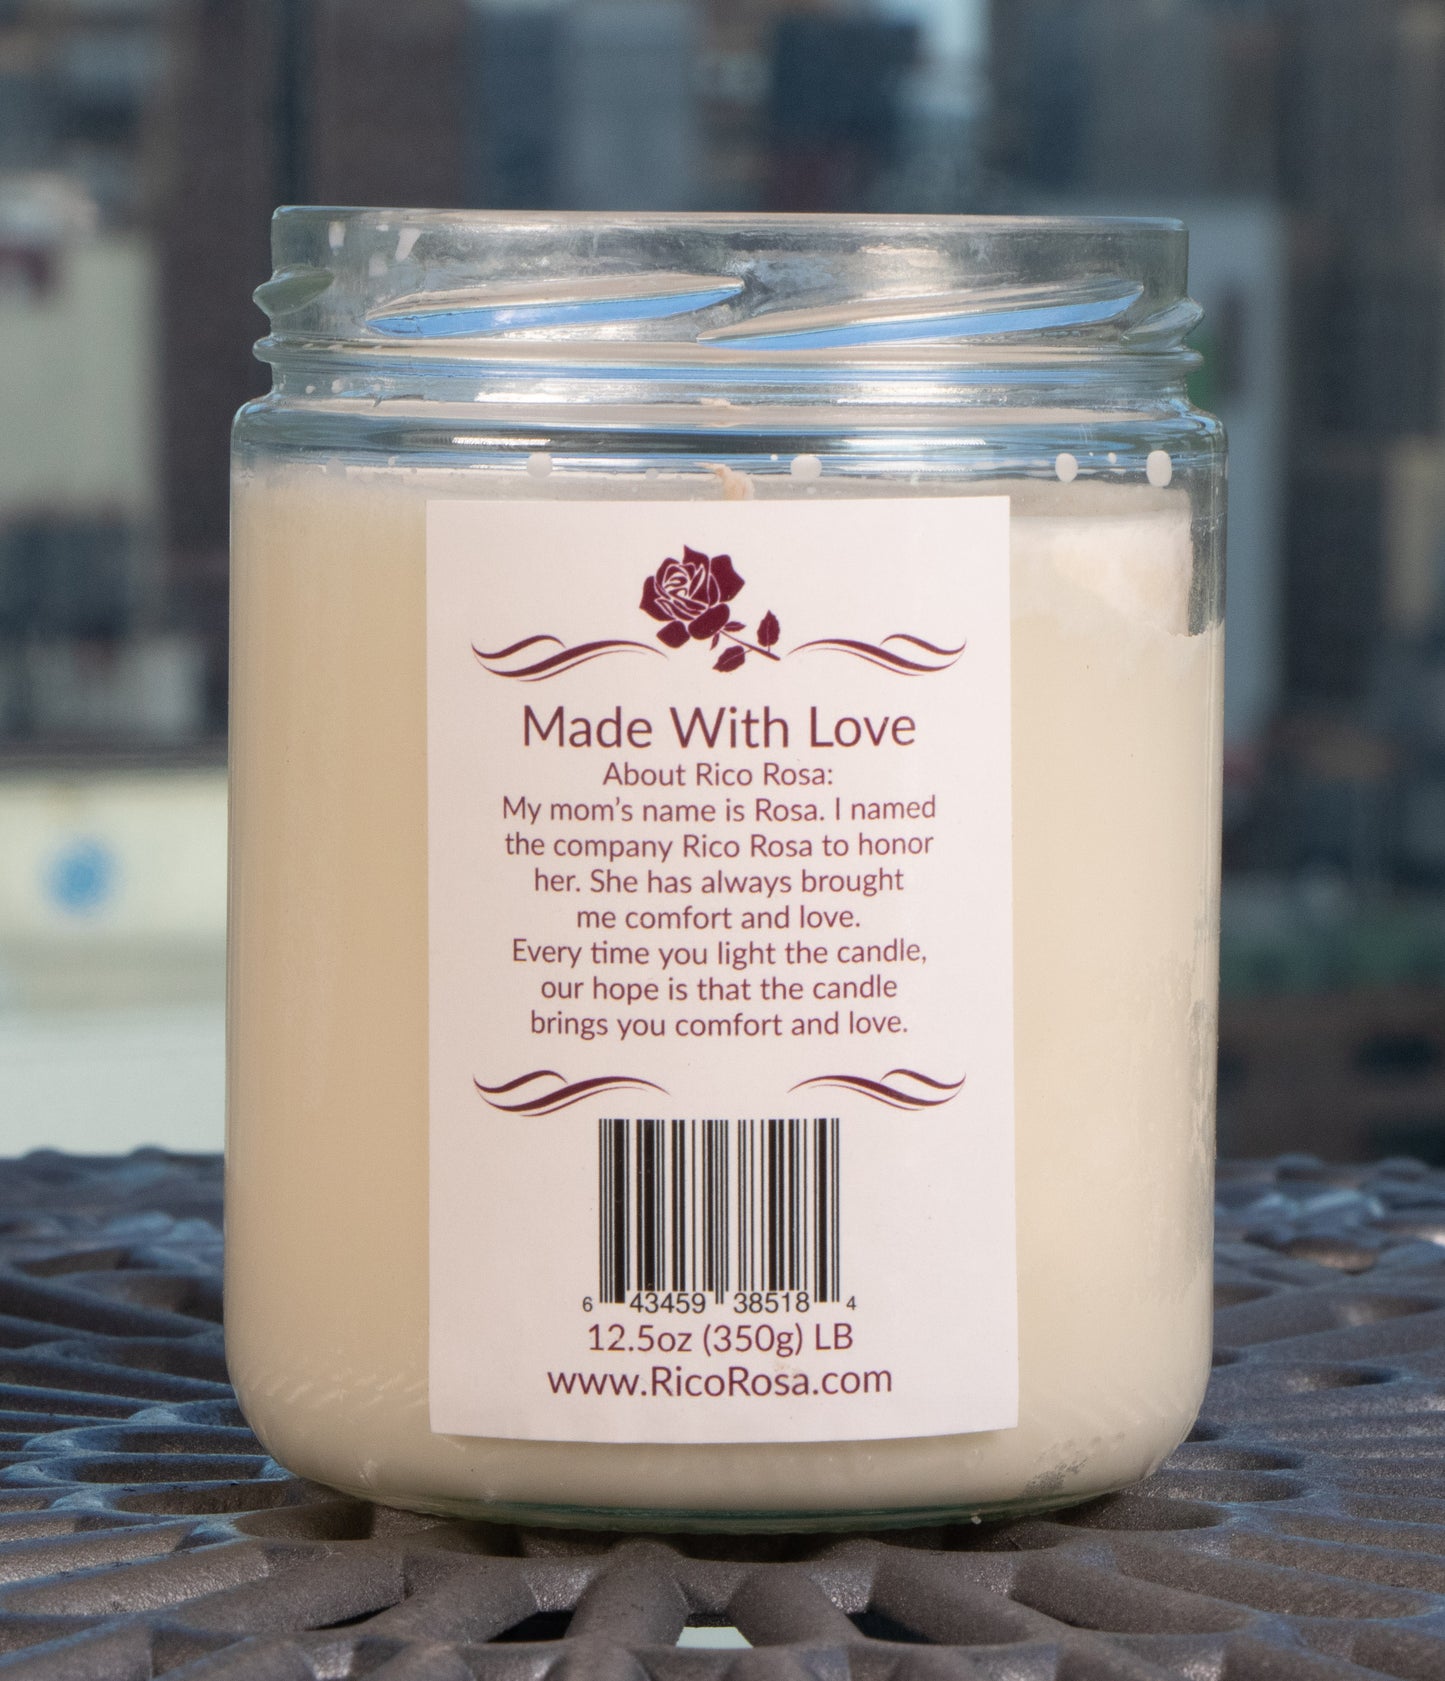 Lilac Blossom Candle: Lilac Scented  Natural Soy Candle